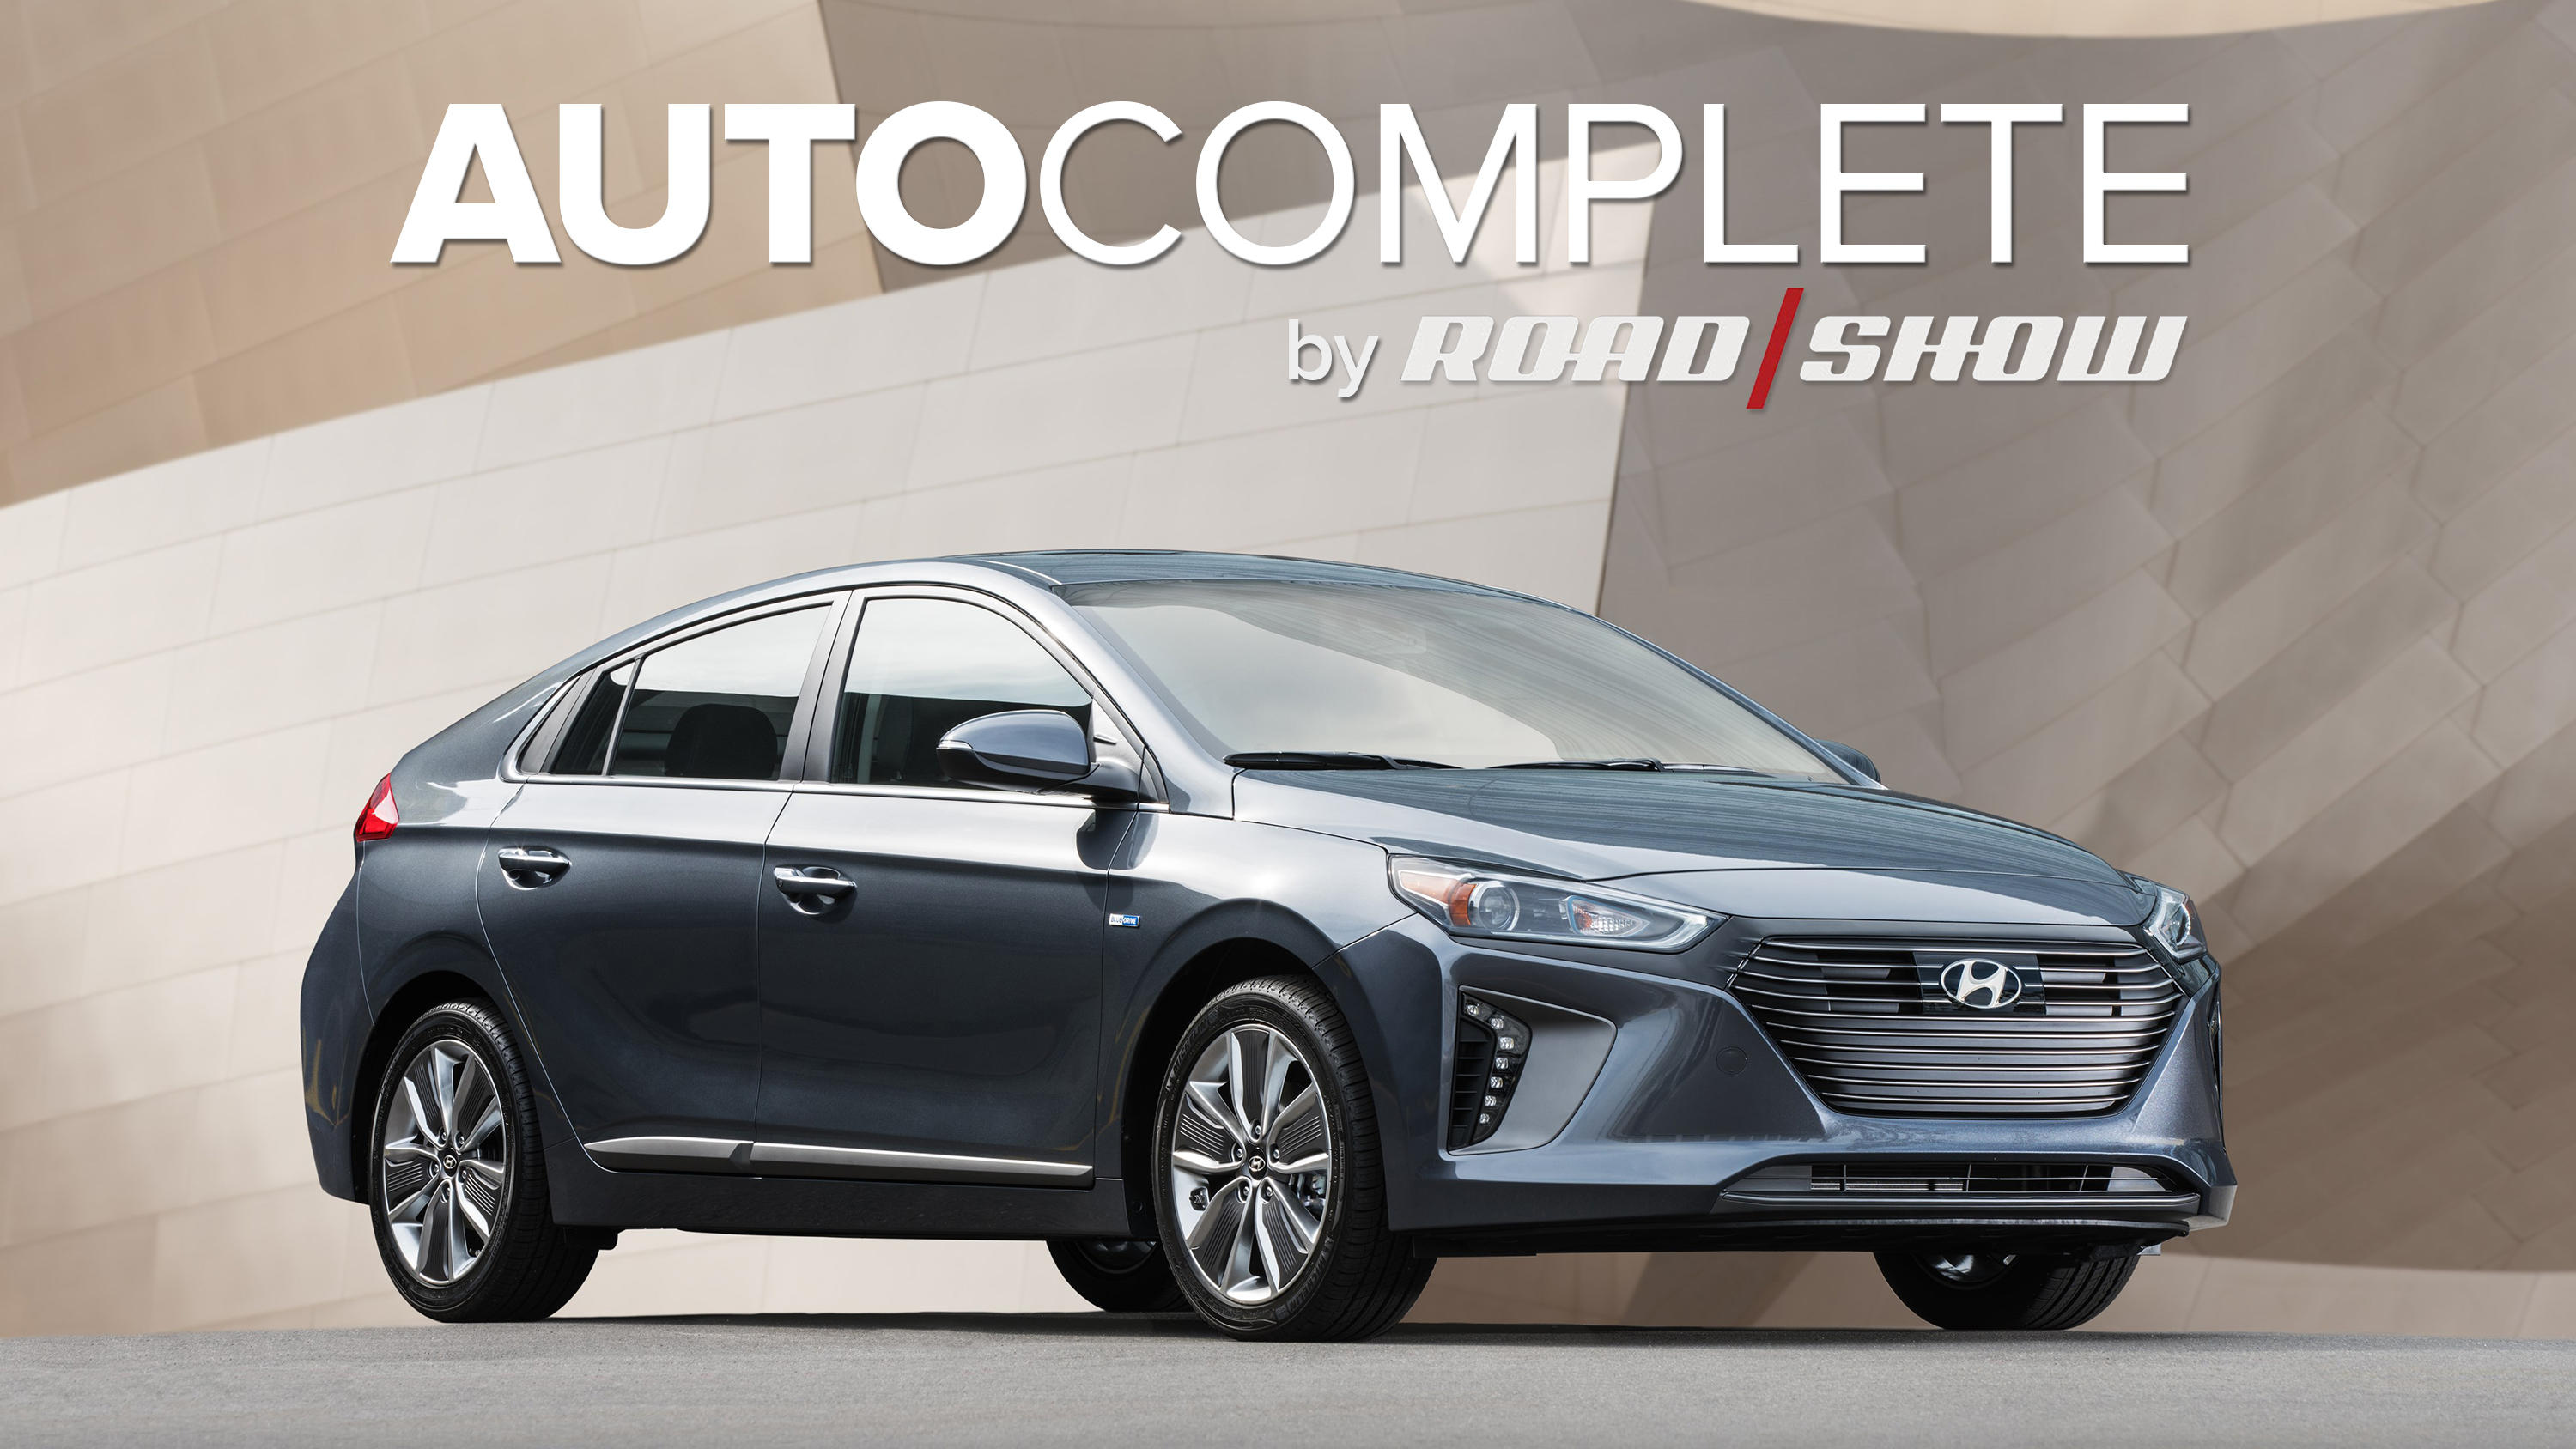 AutoComplete: Hyundai's Ioniq will be the most fuel efficient car without a plug